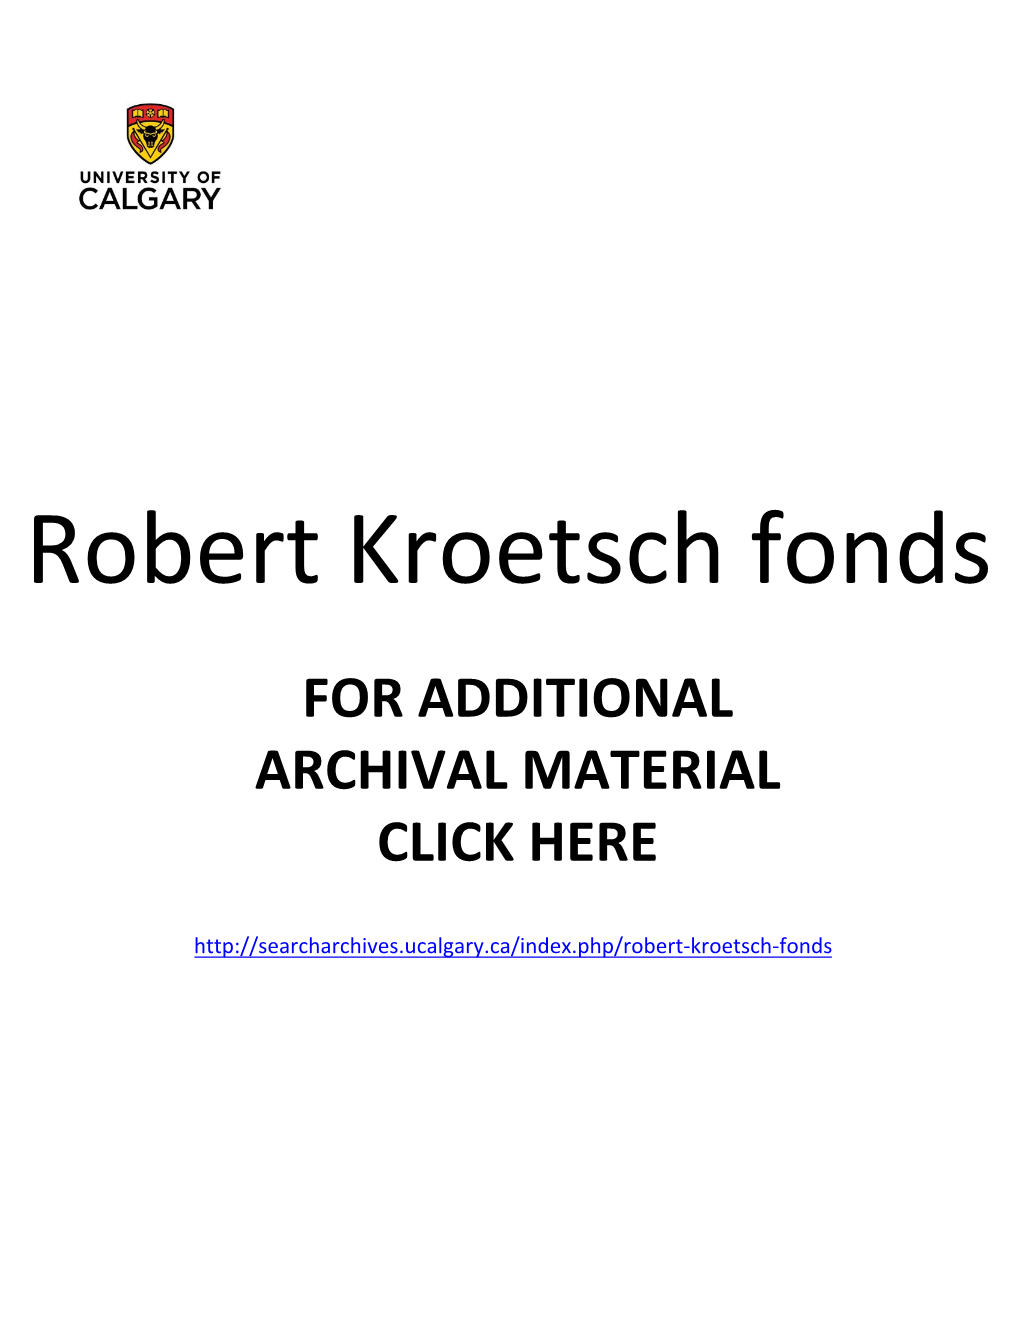 Robert Kroetsch Fonds for ADDITIONAL ARCHIVAL MATERIAL CLICK HERE